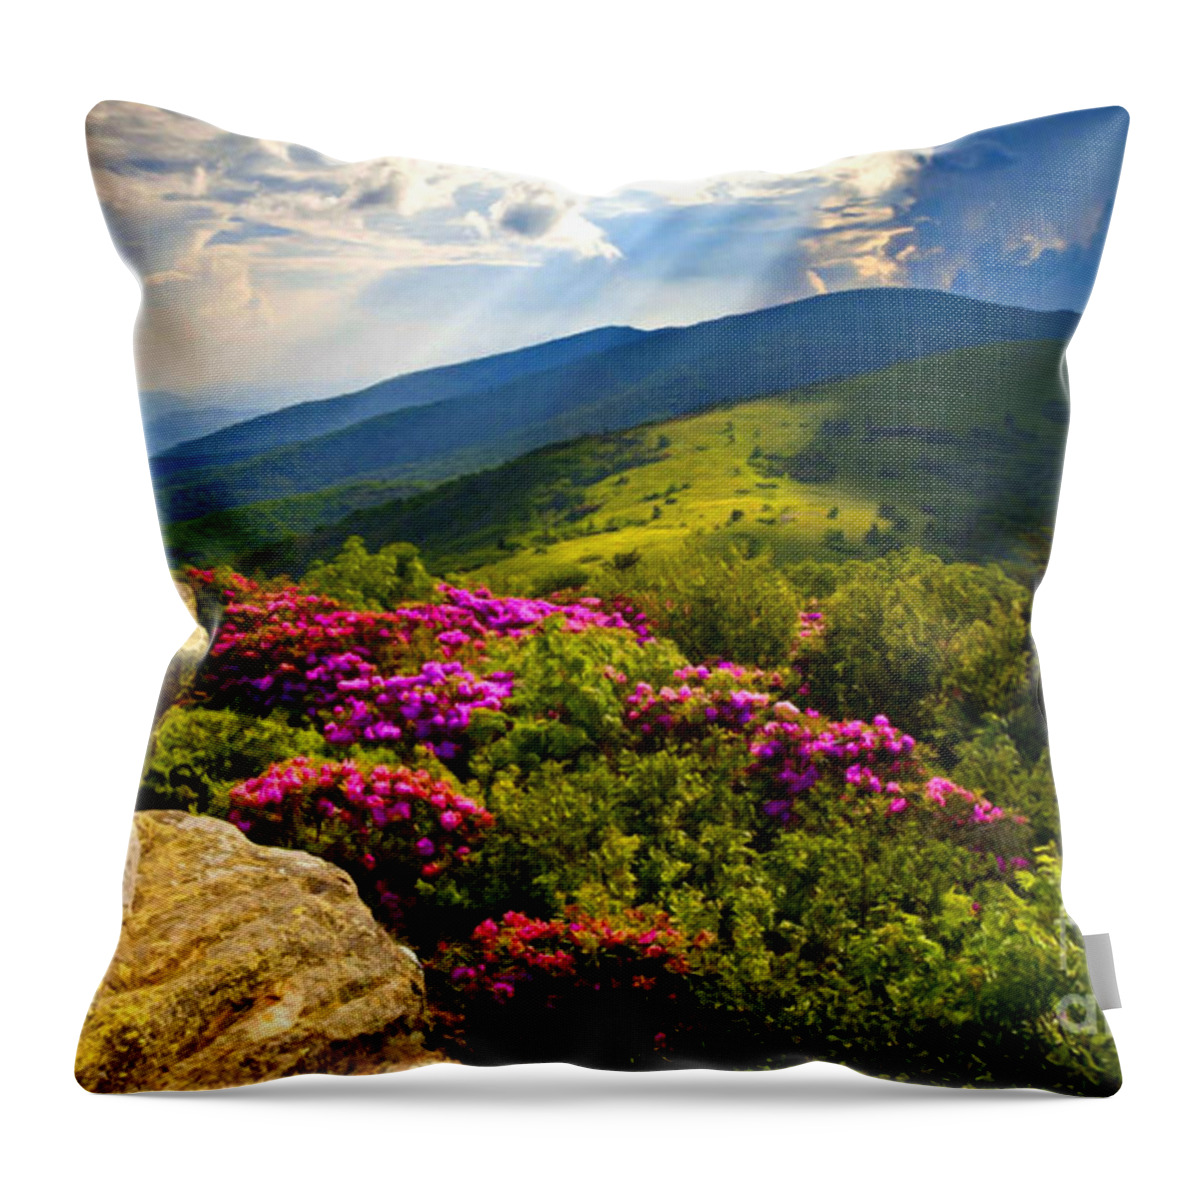 Blue Ridge Parkway Throw Pillow featuring the mixed media Blue Ridge Parkway Catawba Rhododendrons by Sandi OReilly